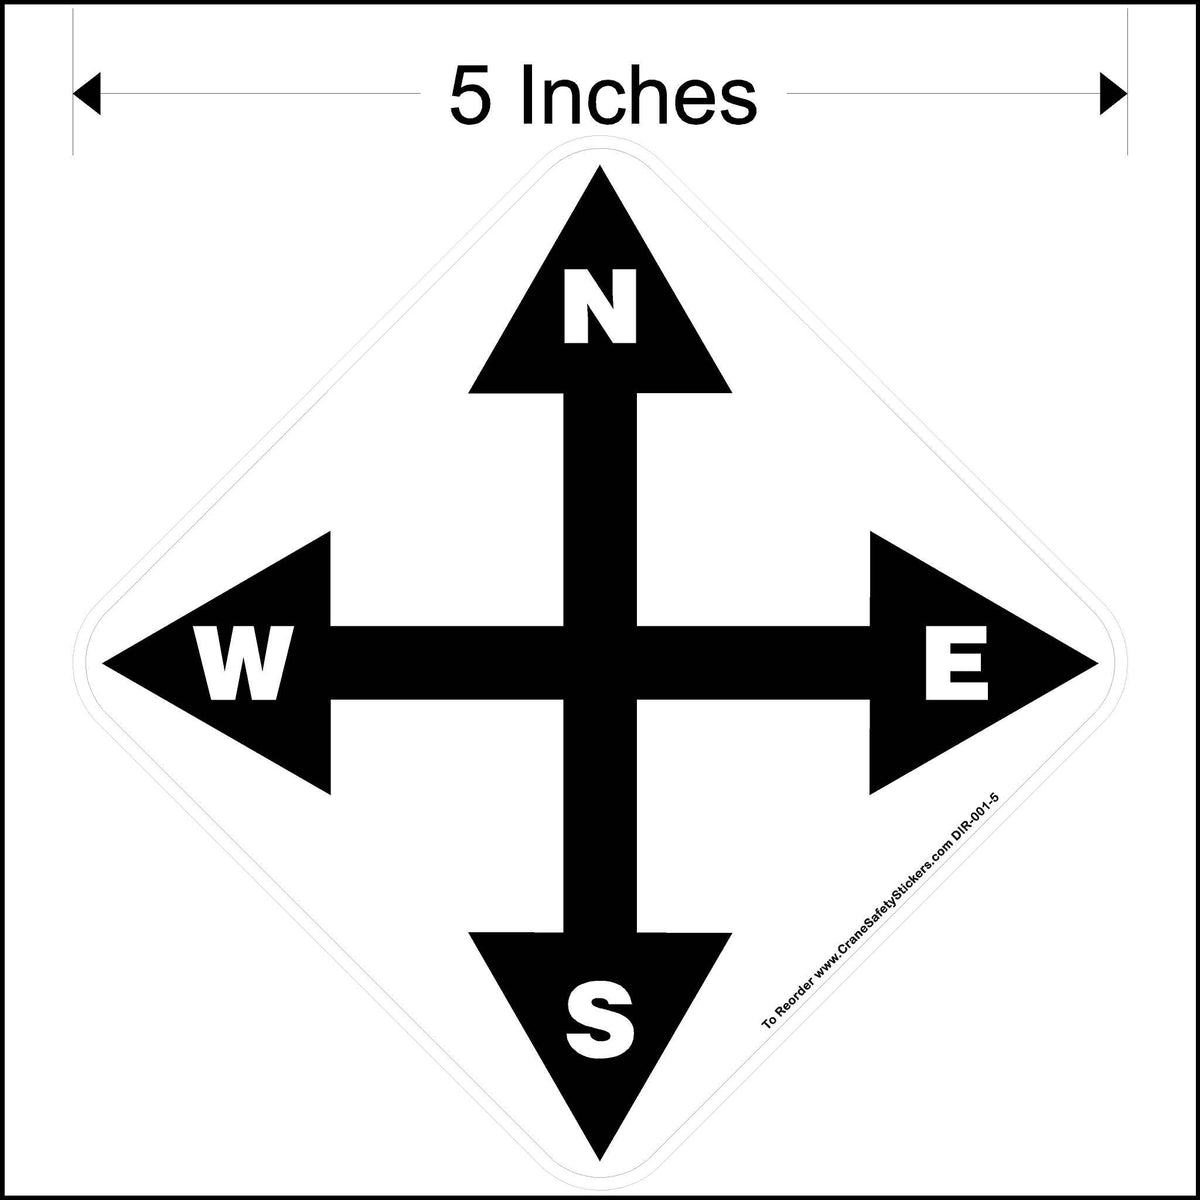 5 Inch North South East West Overhead Crane Directional Decal.